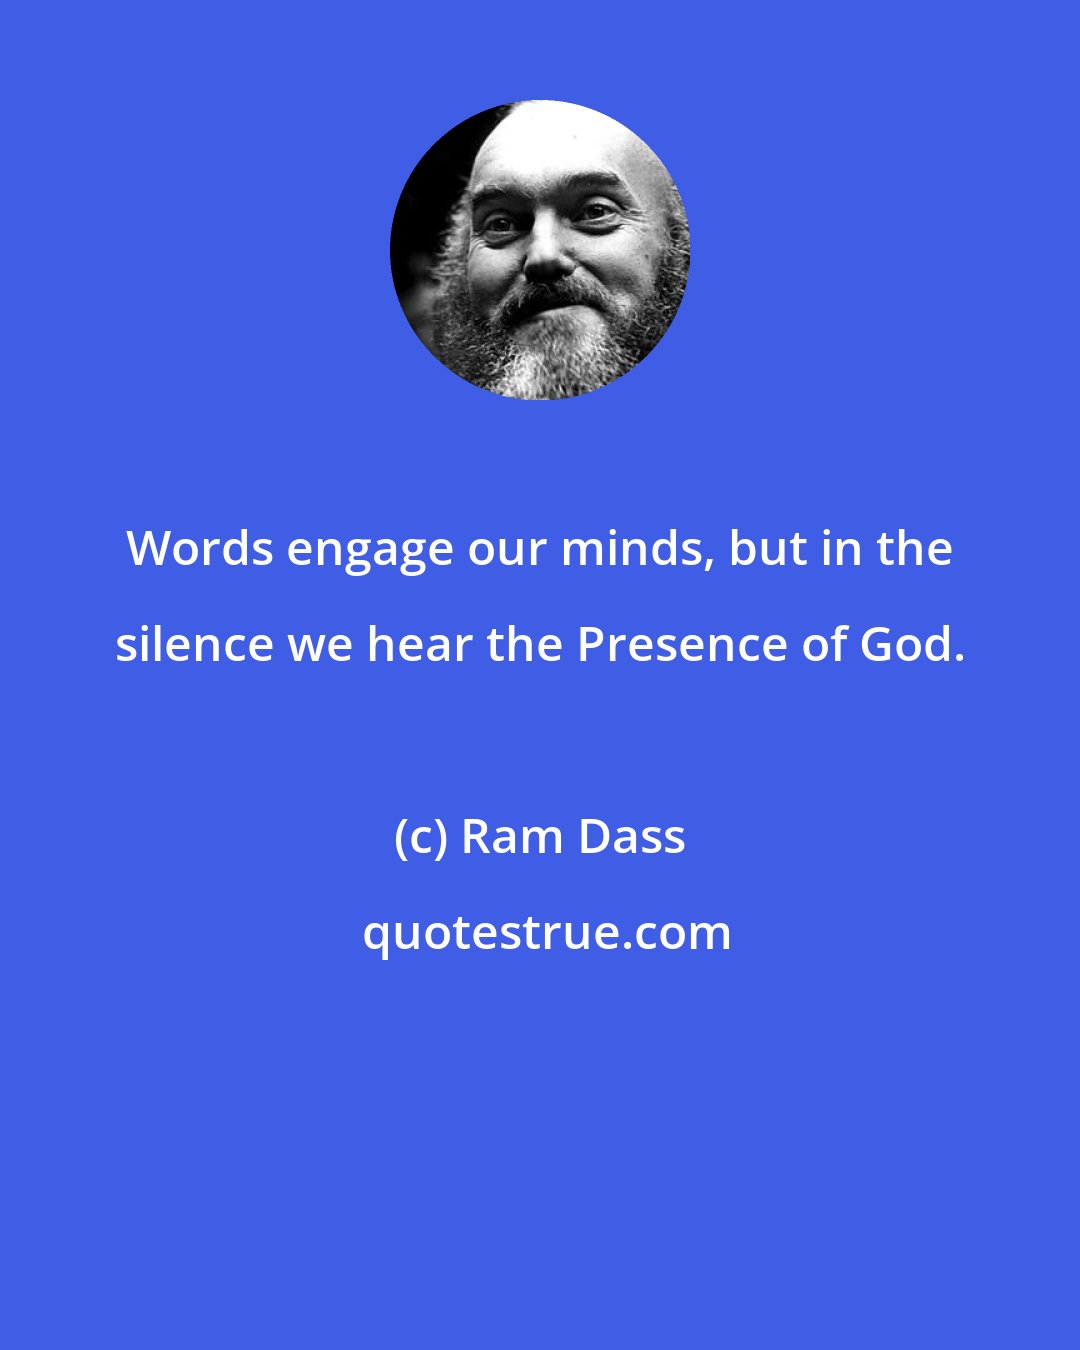 Ram Dass: Words engage our minds, but in the silence we hear the Presence of God.